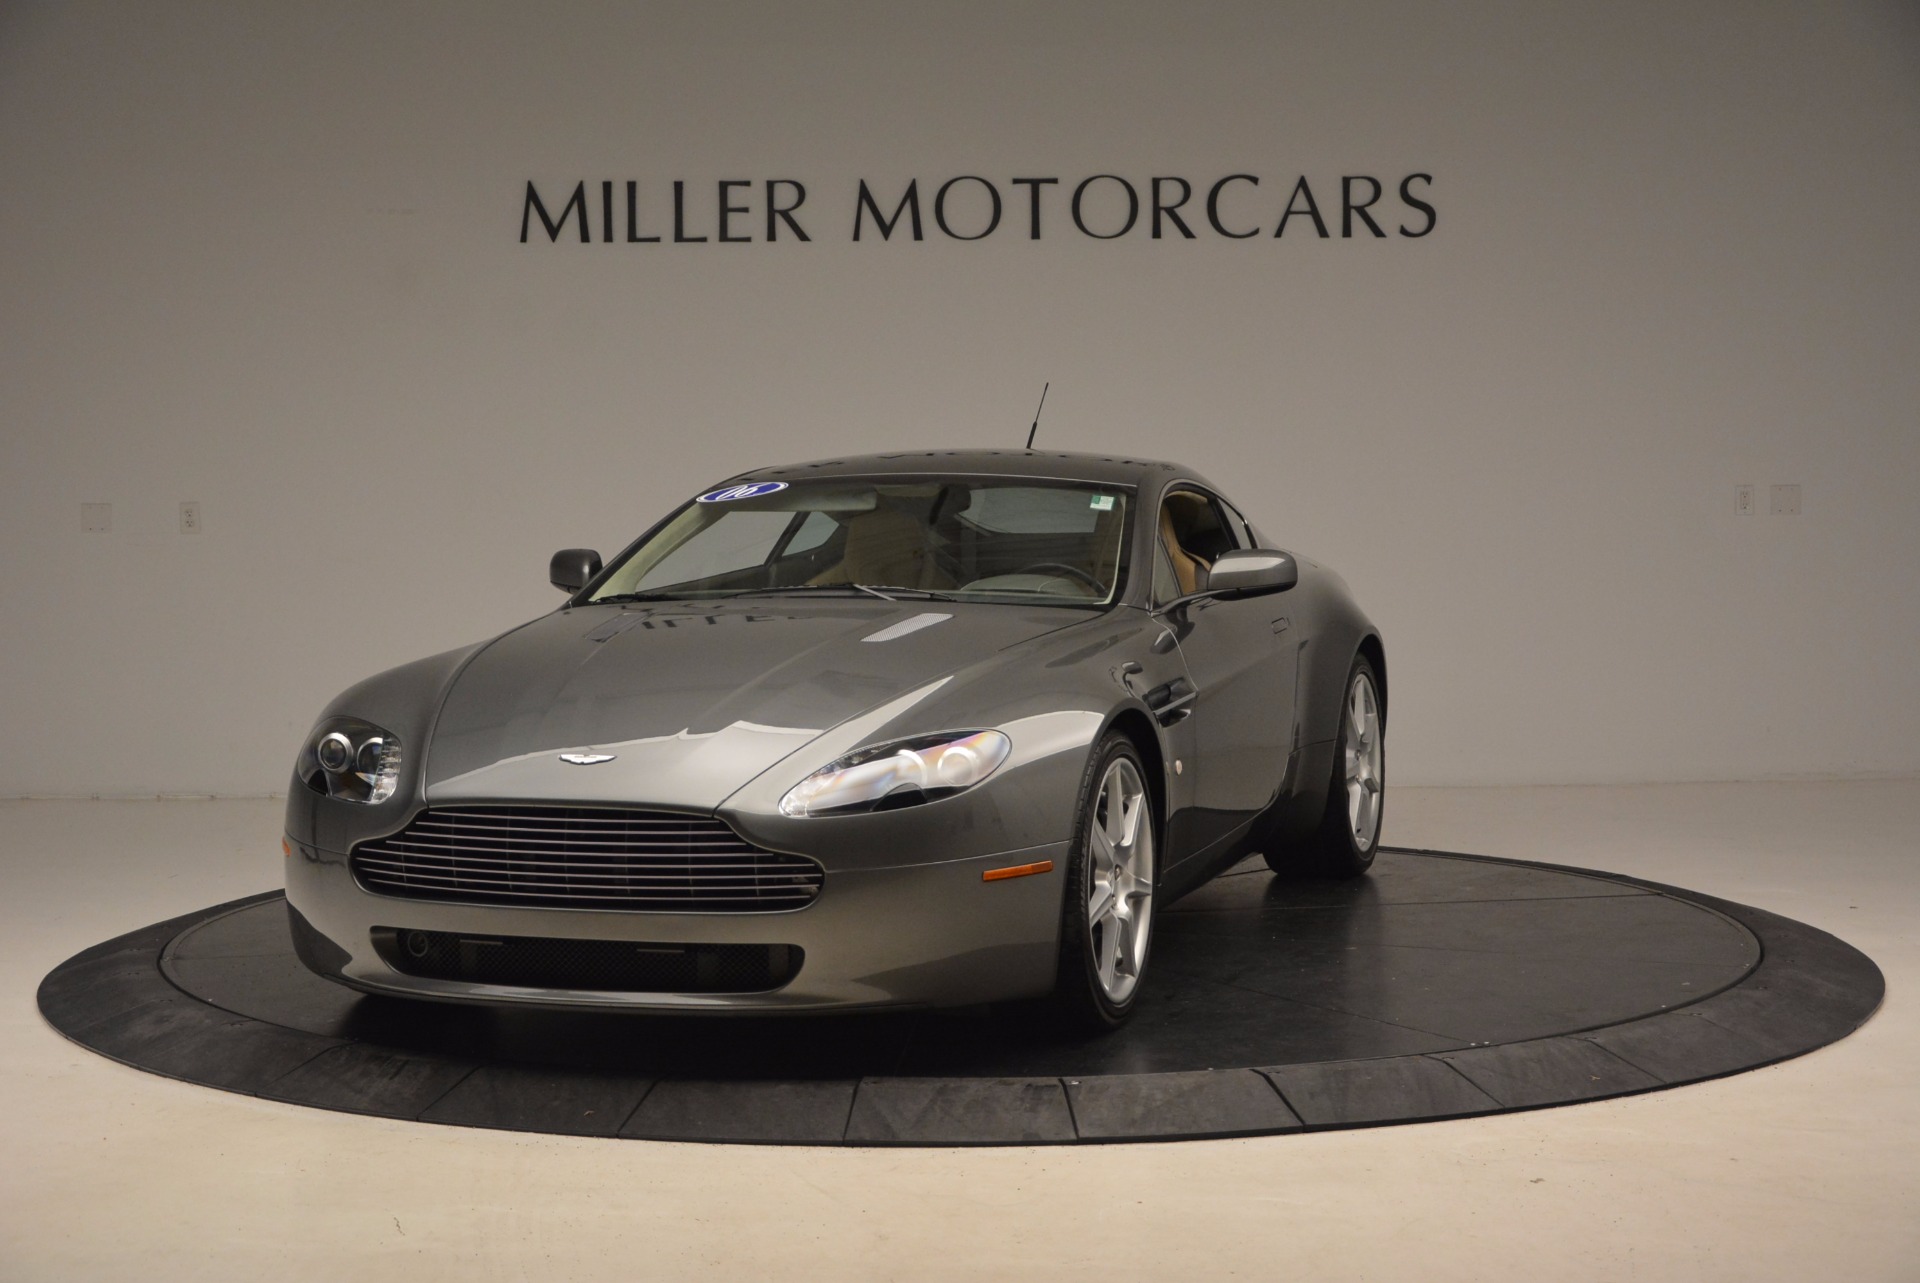 Used 2006 Aston Martin V8 Vantage for sale Sold at McLaren Greenwich in Greenwich CT 06830 1